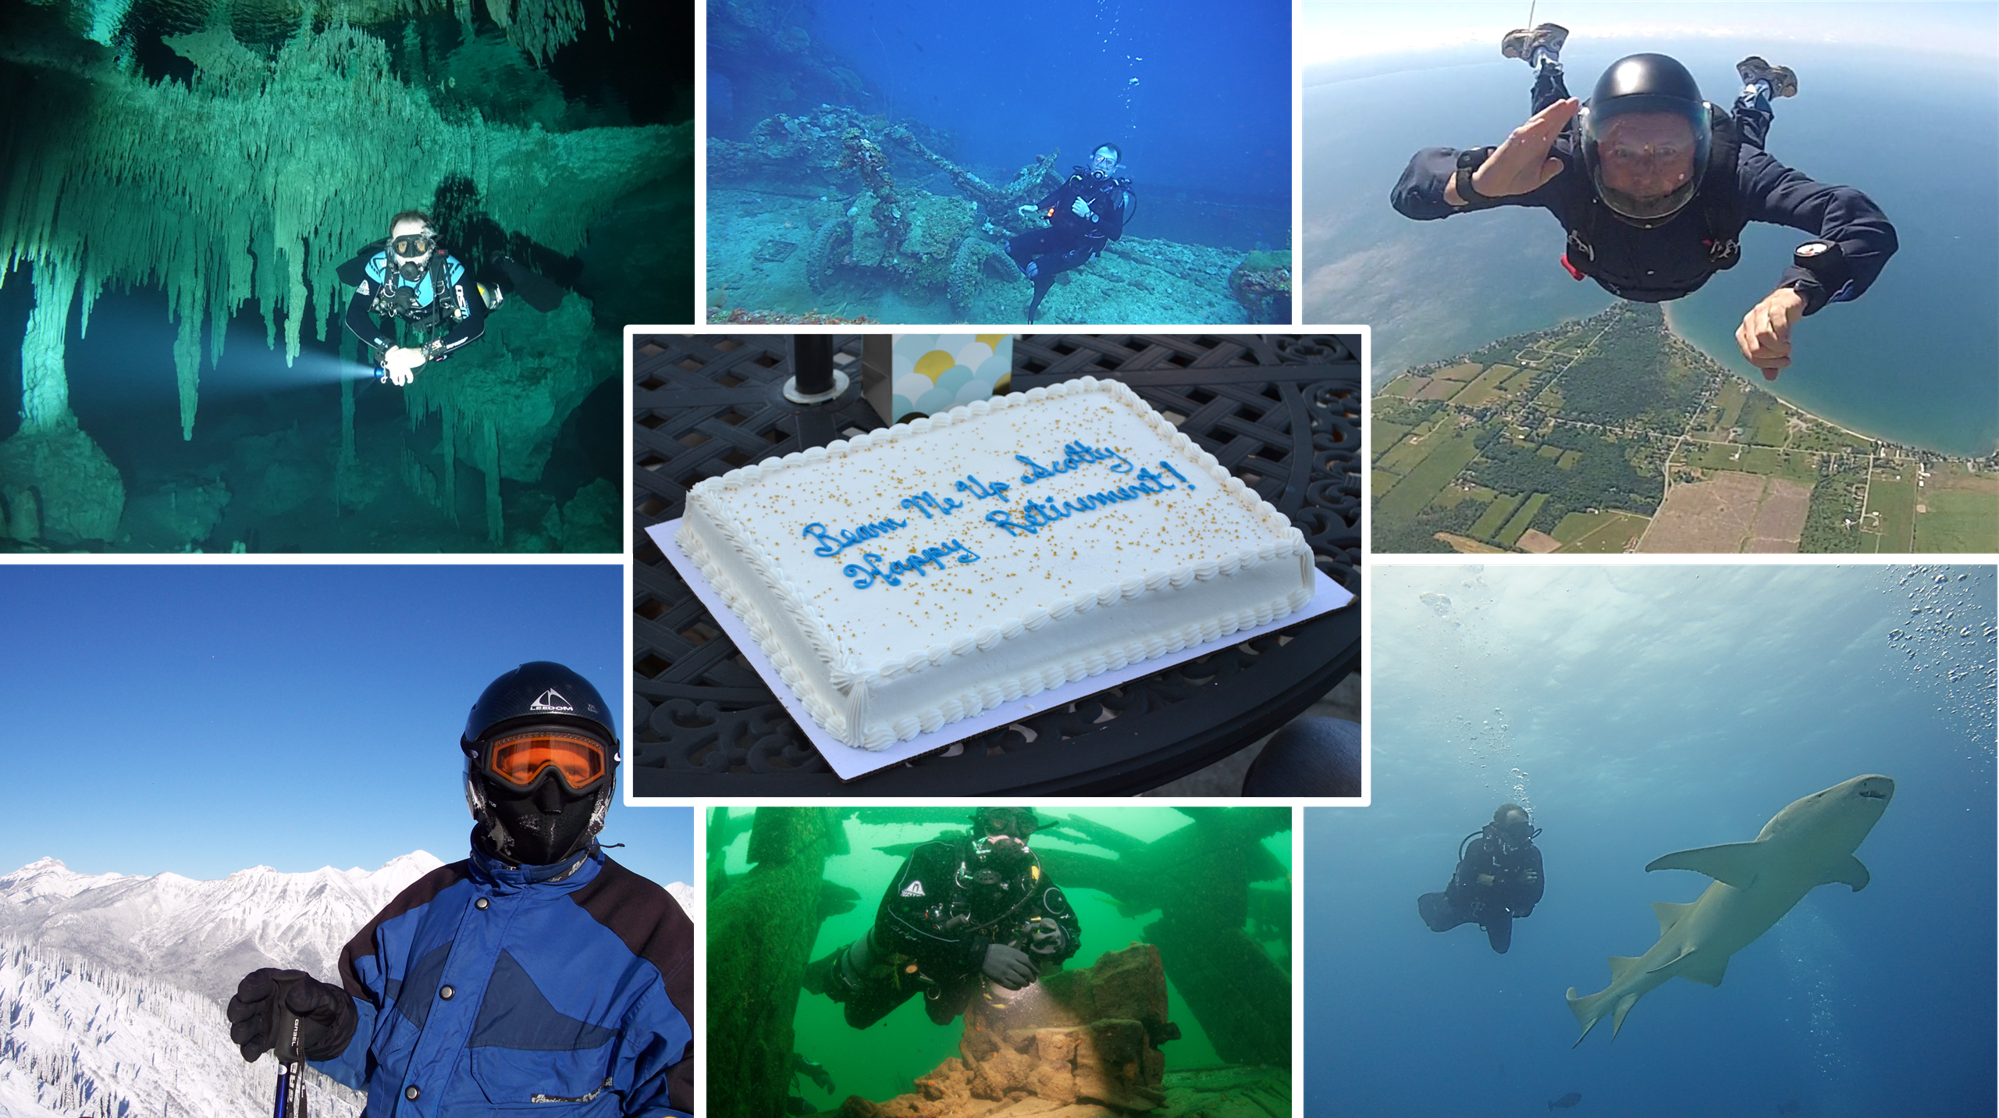 Photo collage showing a man skiing, skydiving, swimming with a shark and scuba diving.